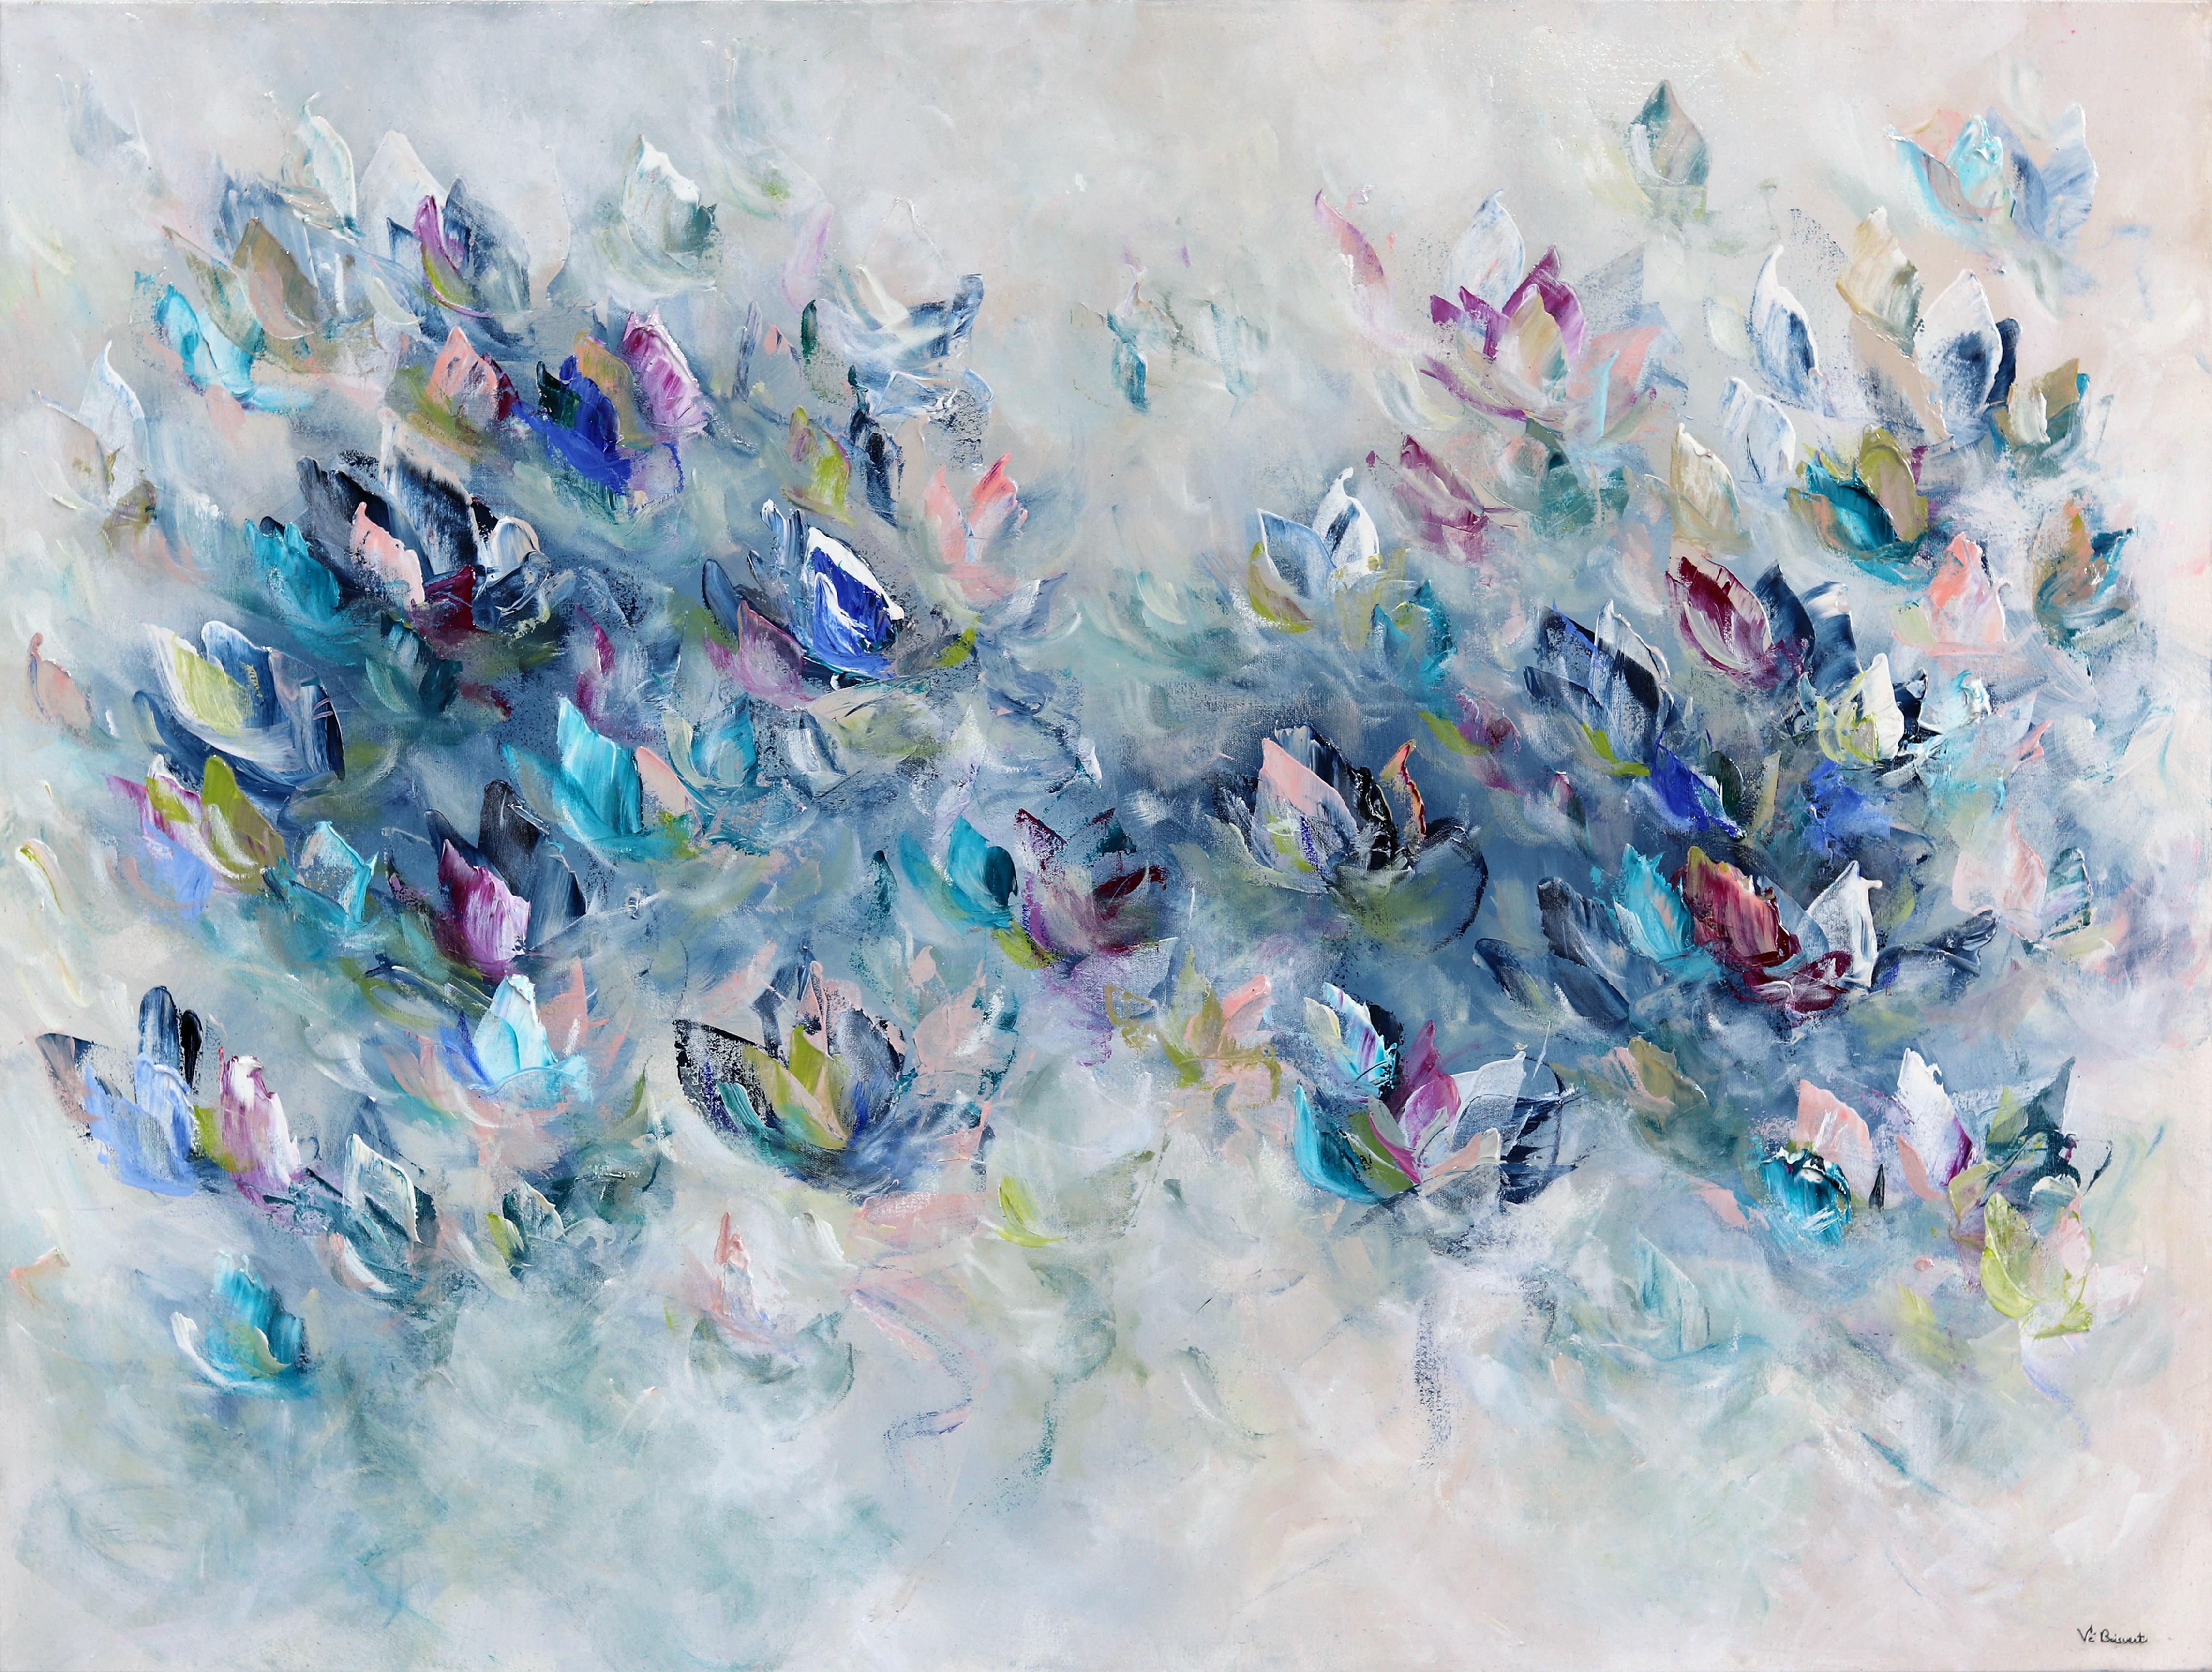 Vè Boisvert Landscape Painting - Poetry Of The Sky - Soft Abstract Floral Painting